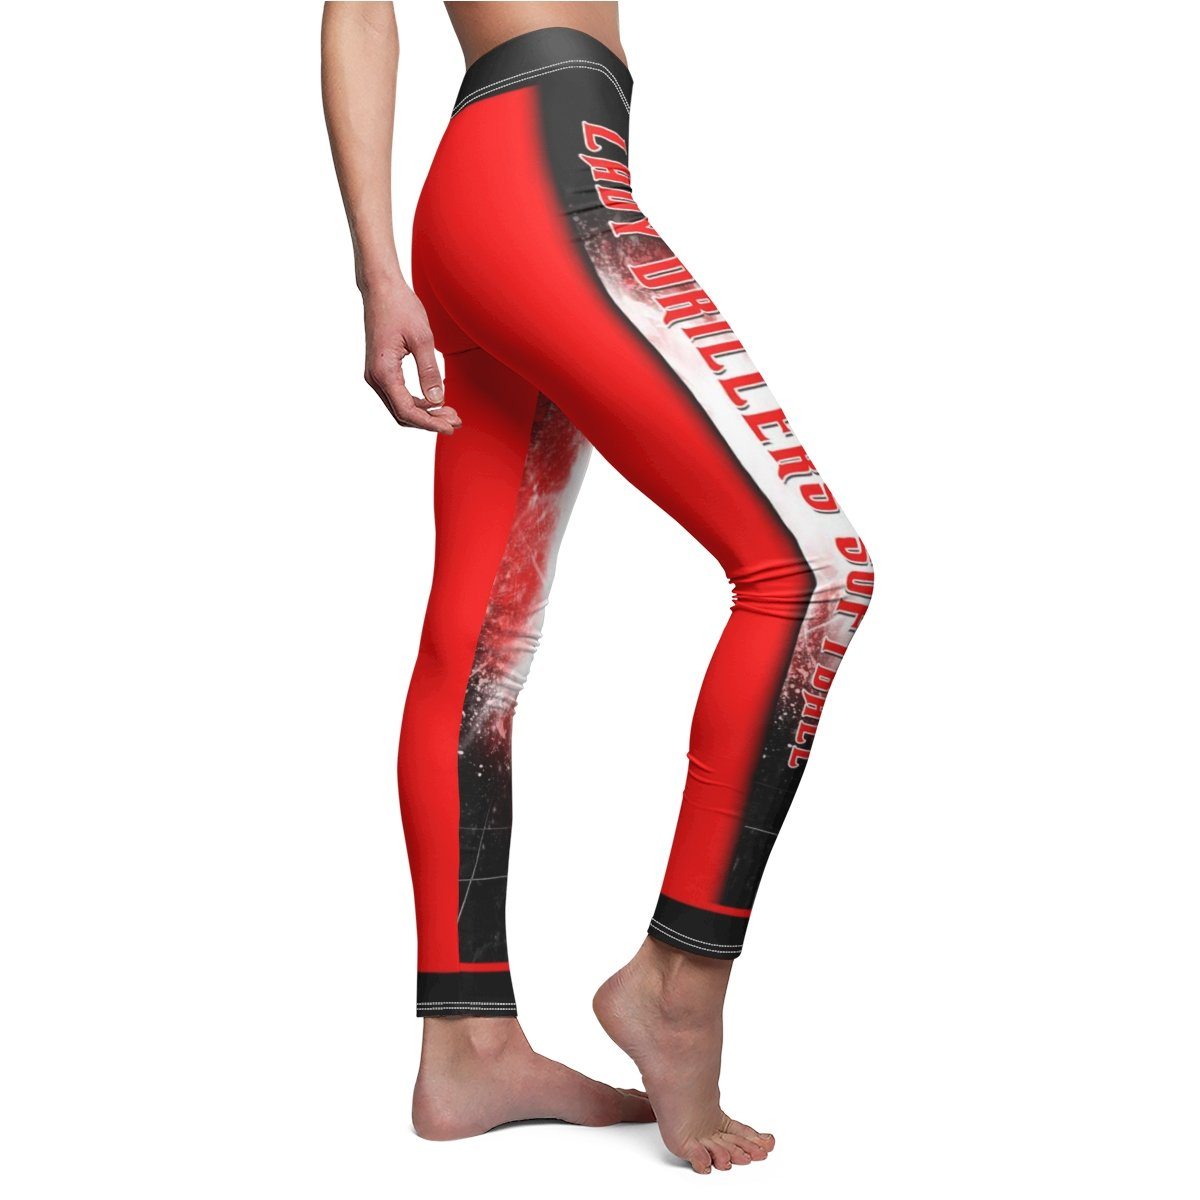 Starburst - V.5 - Extreme Sportswear Cut & Sew Leggings Template-Photoshop Template - Photo Solutions